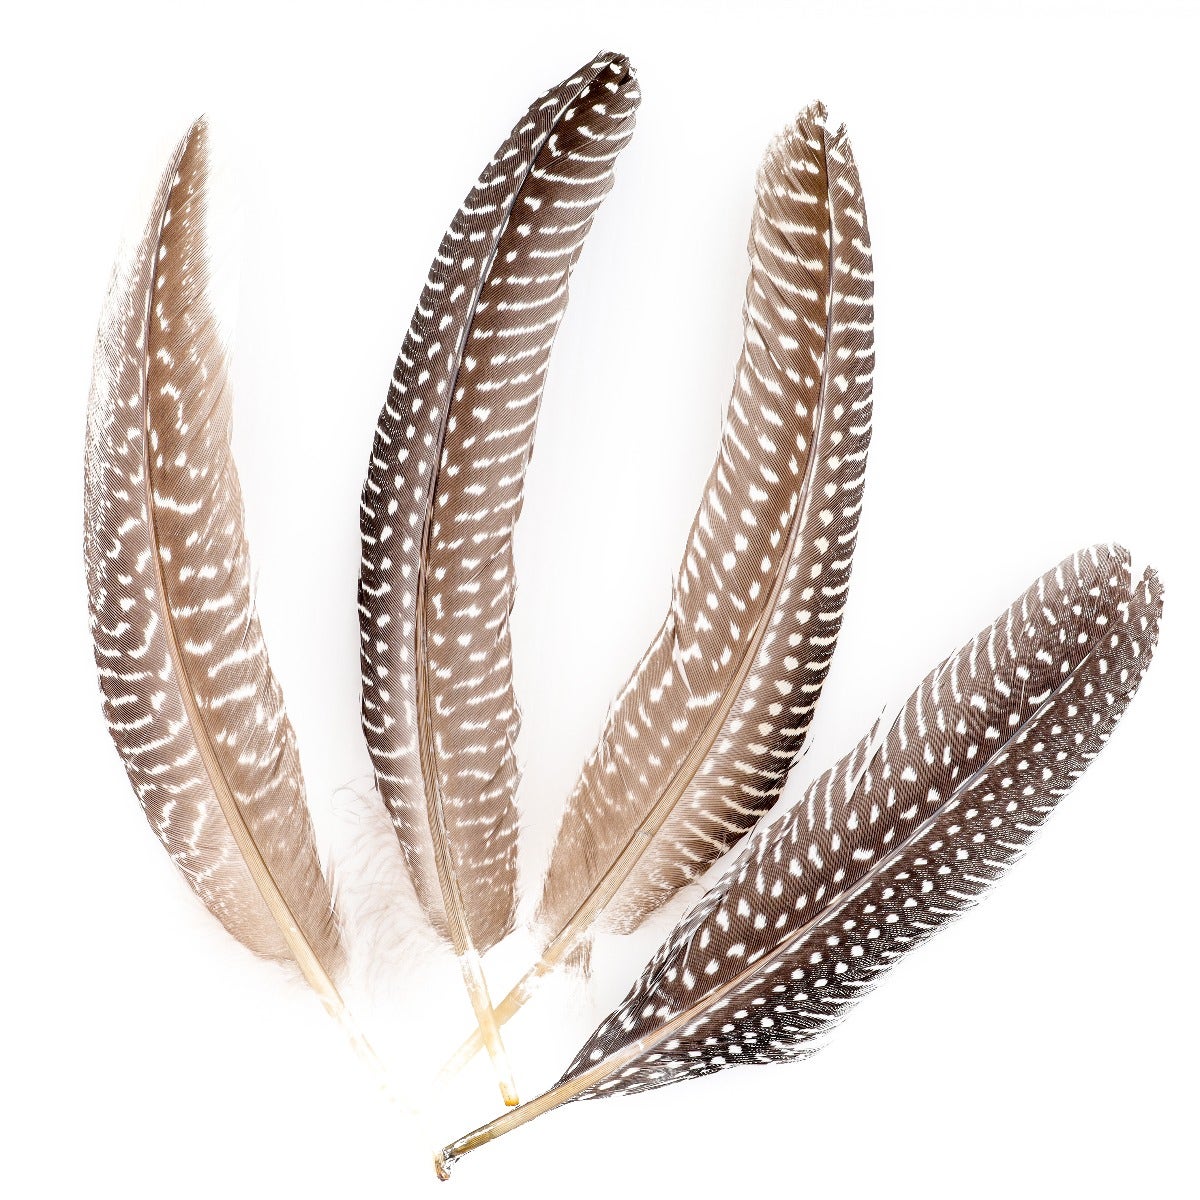 NATURAL GUINEA HEN ROUNDS 6-8" - 12 PC